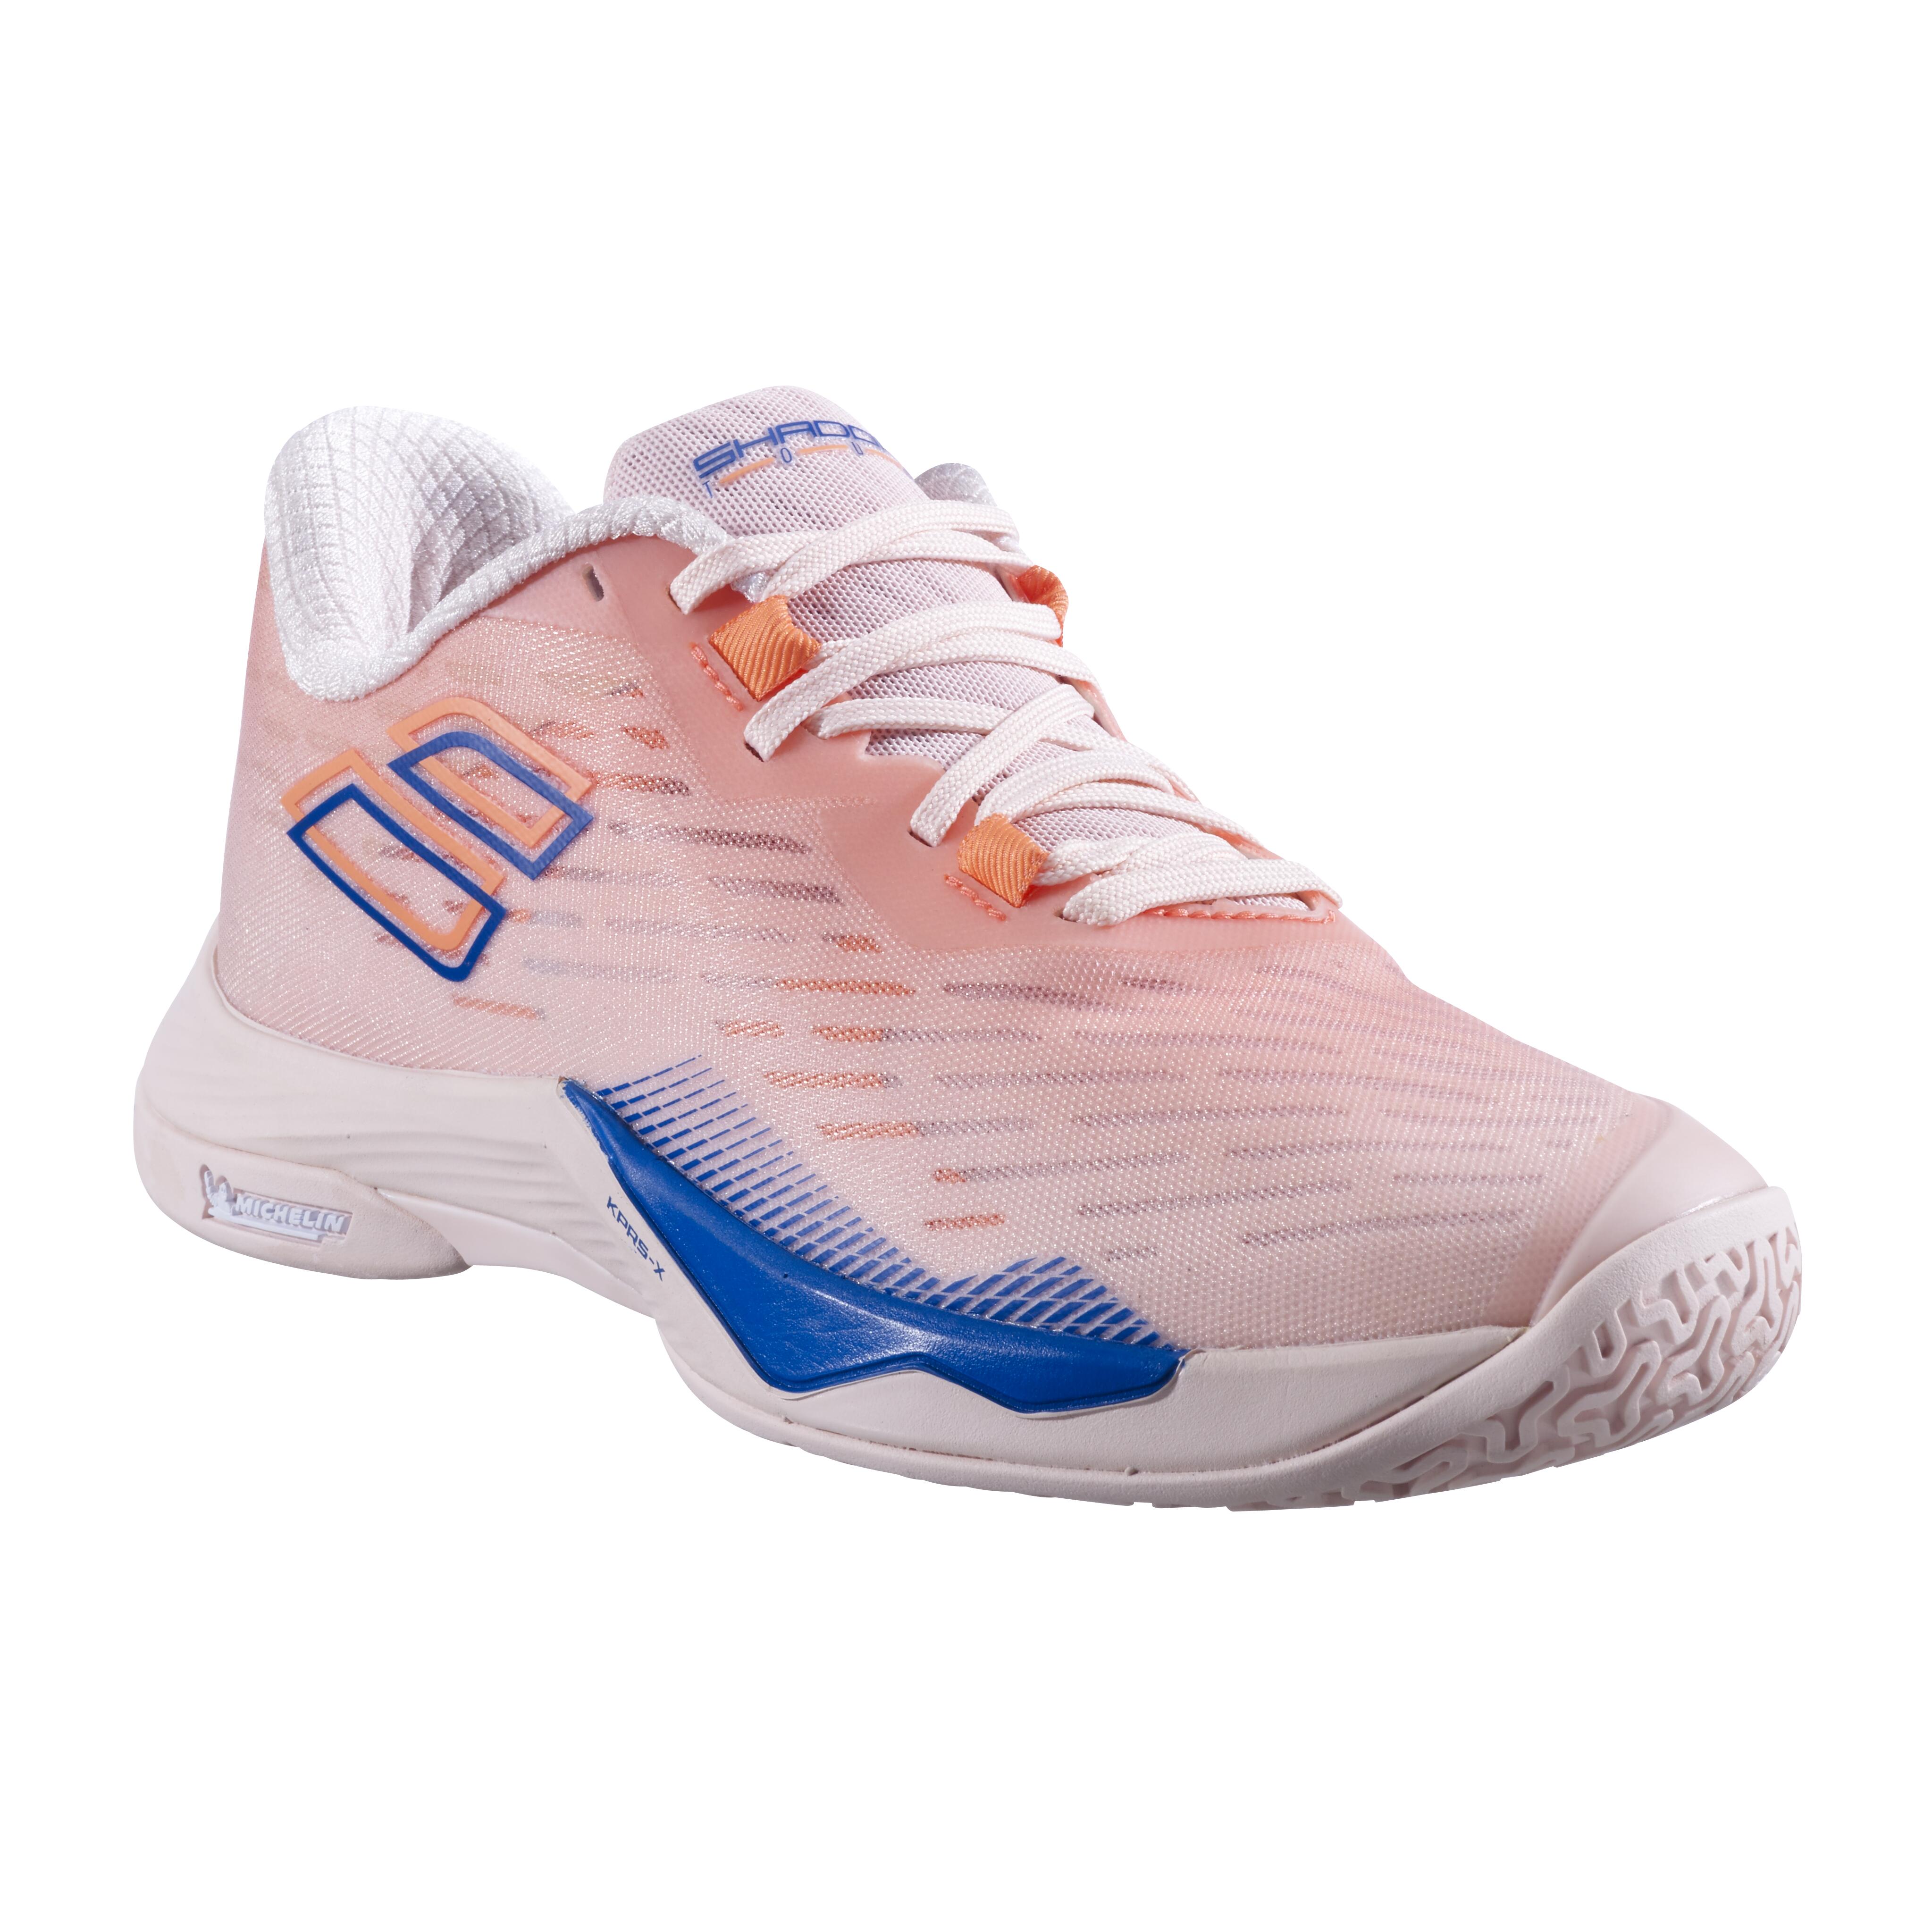 BABOLAT Chaussure Femme Shadow Tour 5 Rose -